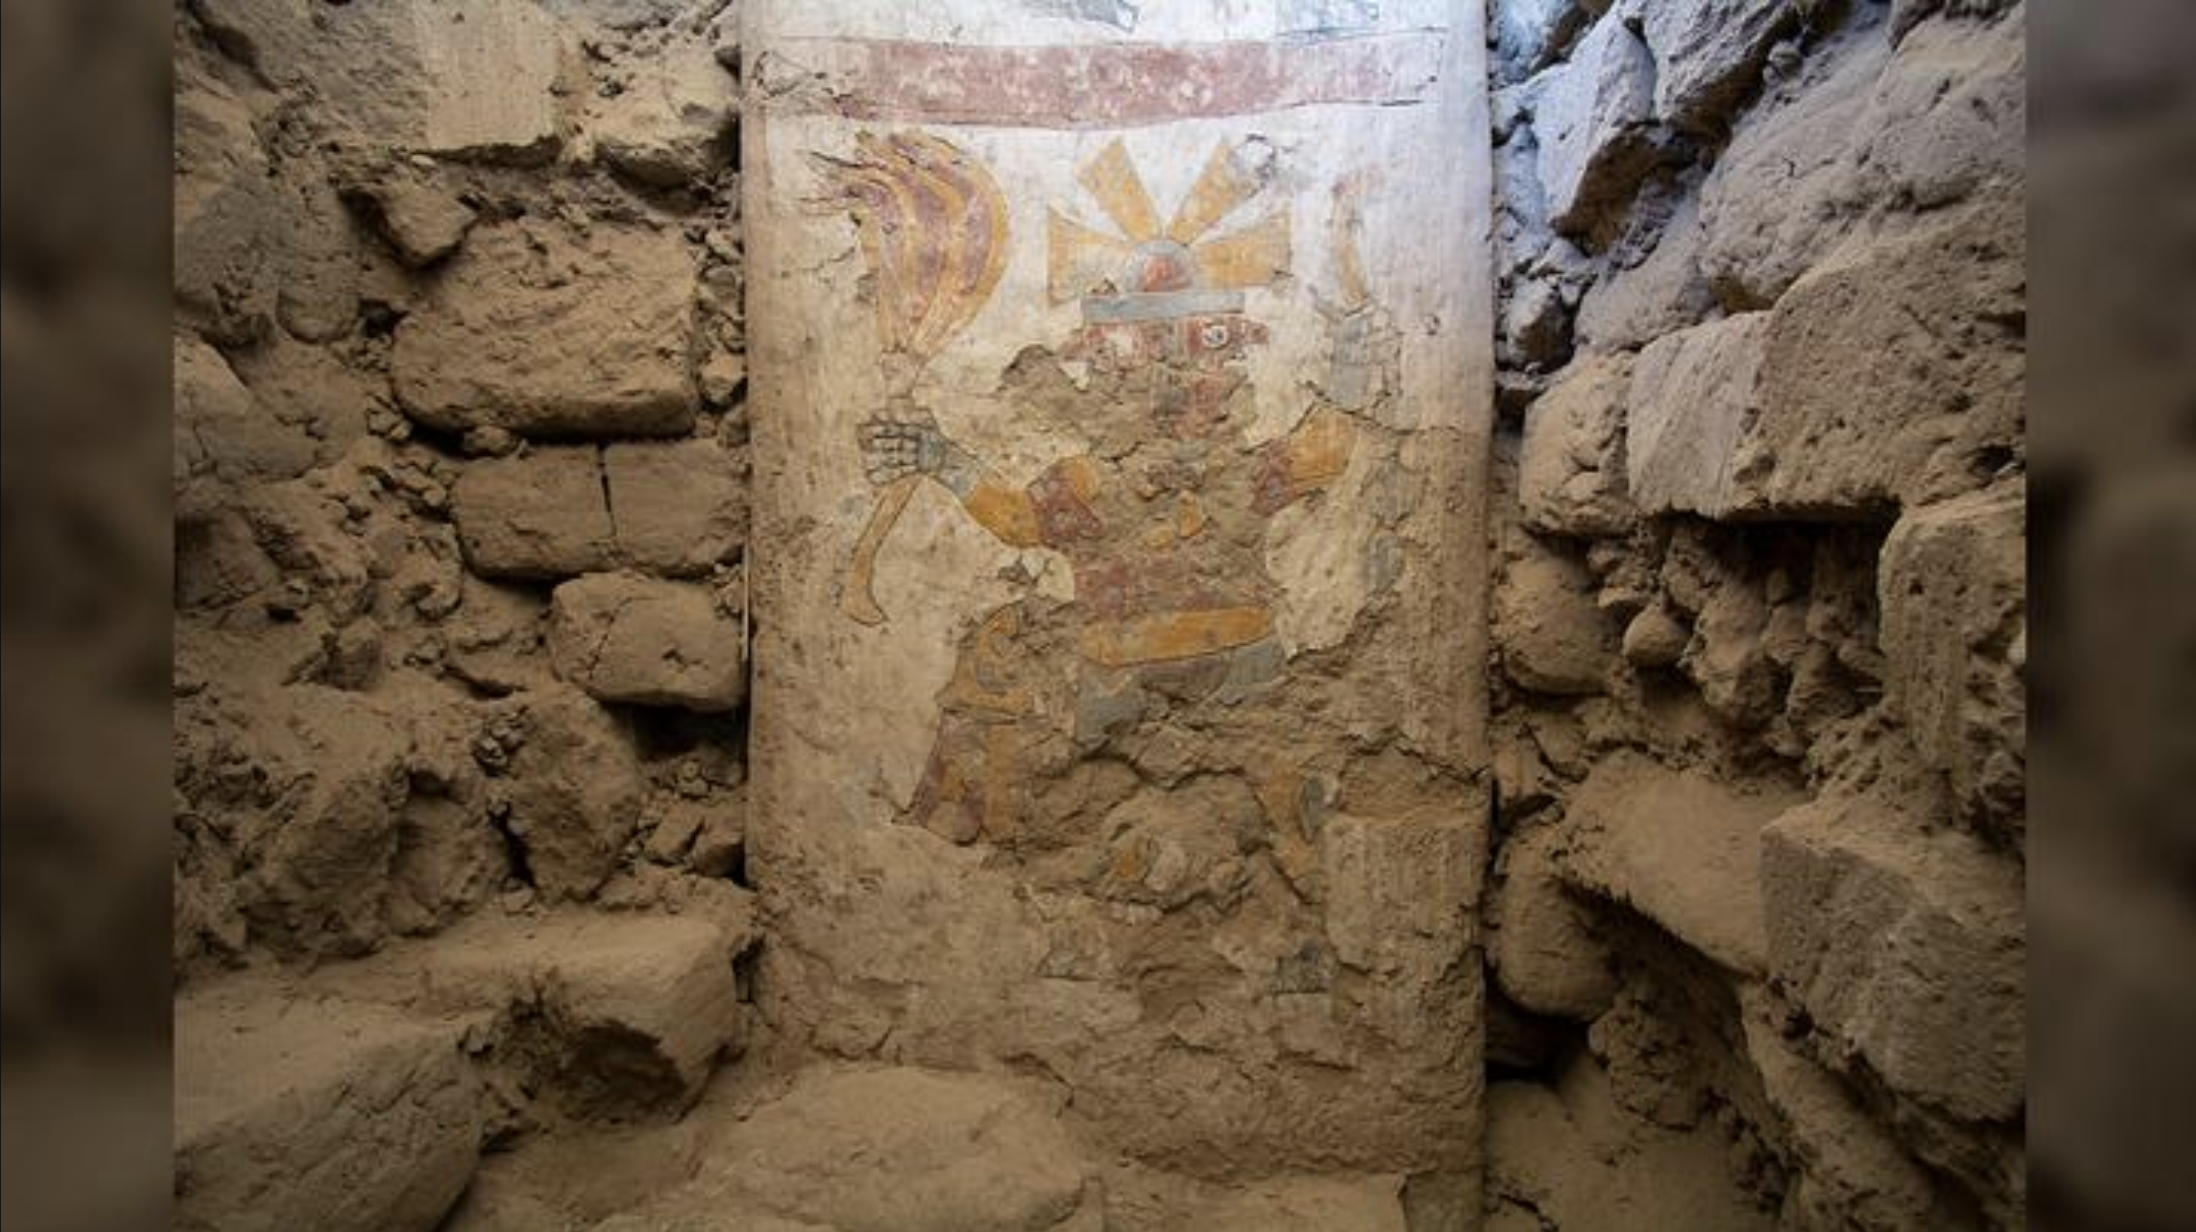 A photograph of the ancient Moche relief. Image Credit: Pañamarca Digital.